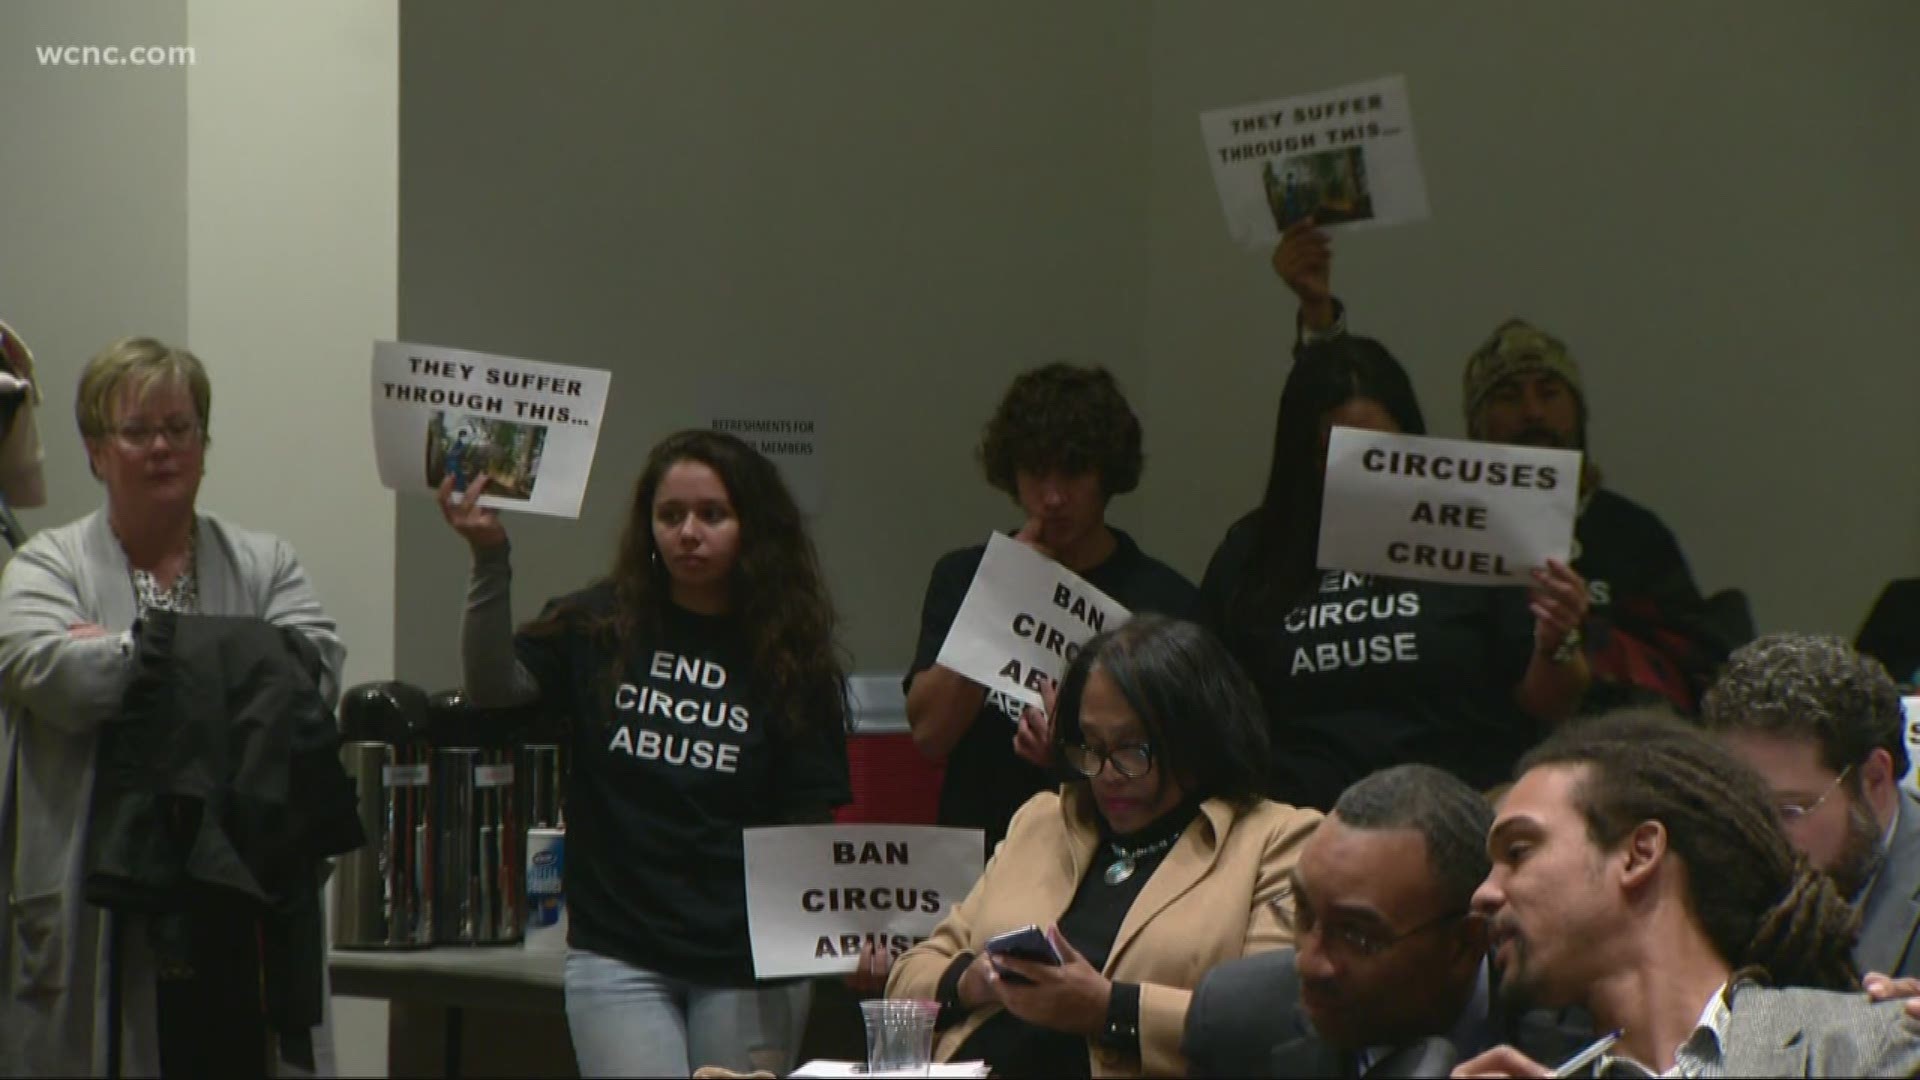 City leaders have been considering this amid discussions of animal cruelty for circus animals. Protestors were standing by as the topic came up.